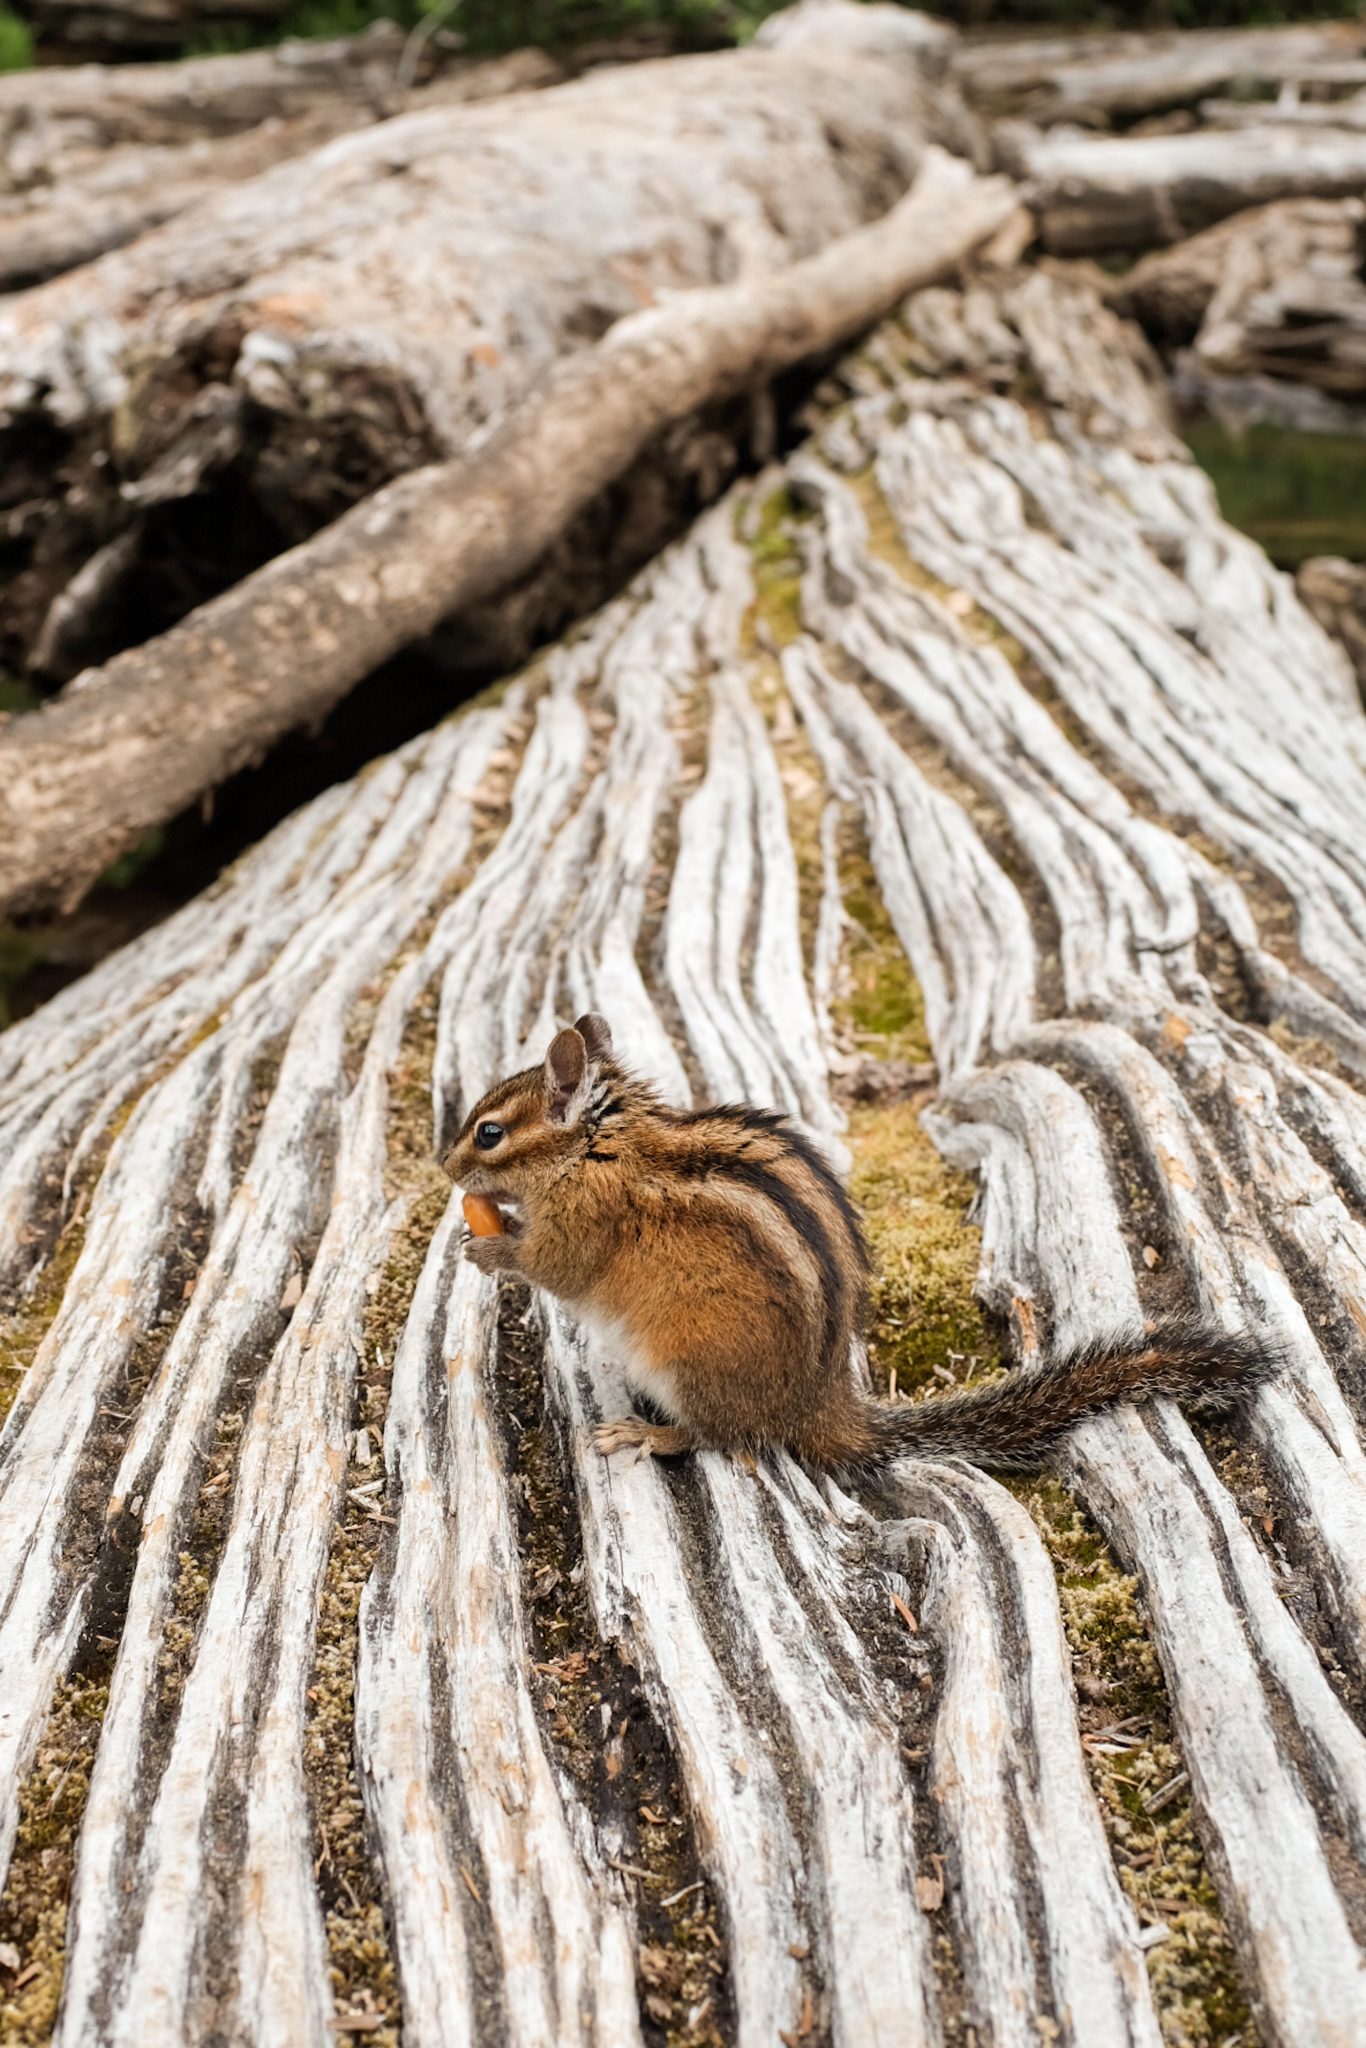 Chipmunk in the Washington wilderness, nibbling food on a log